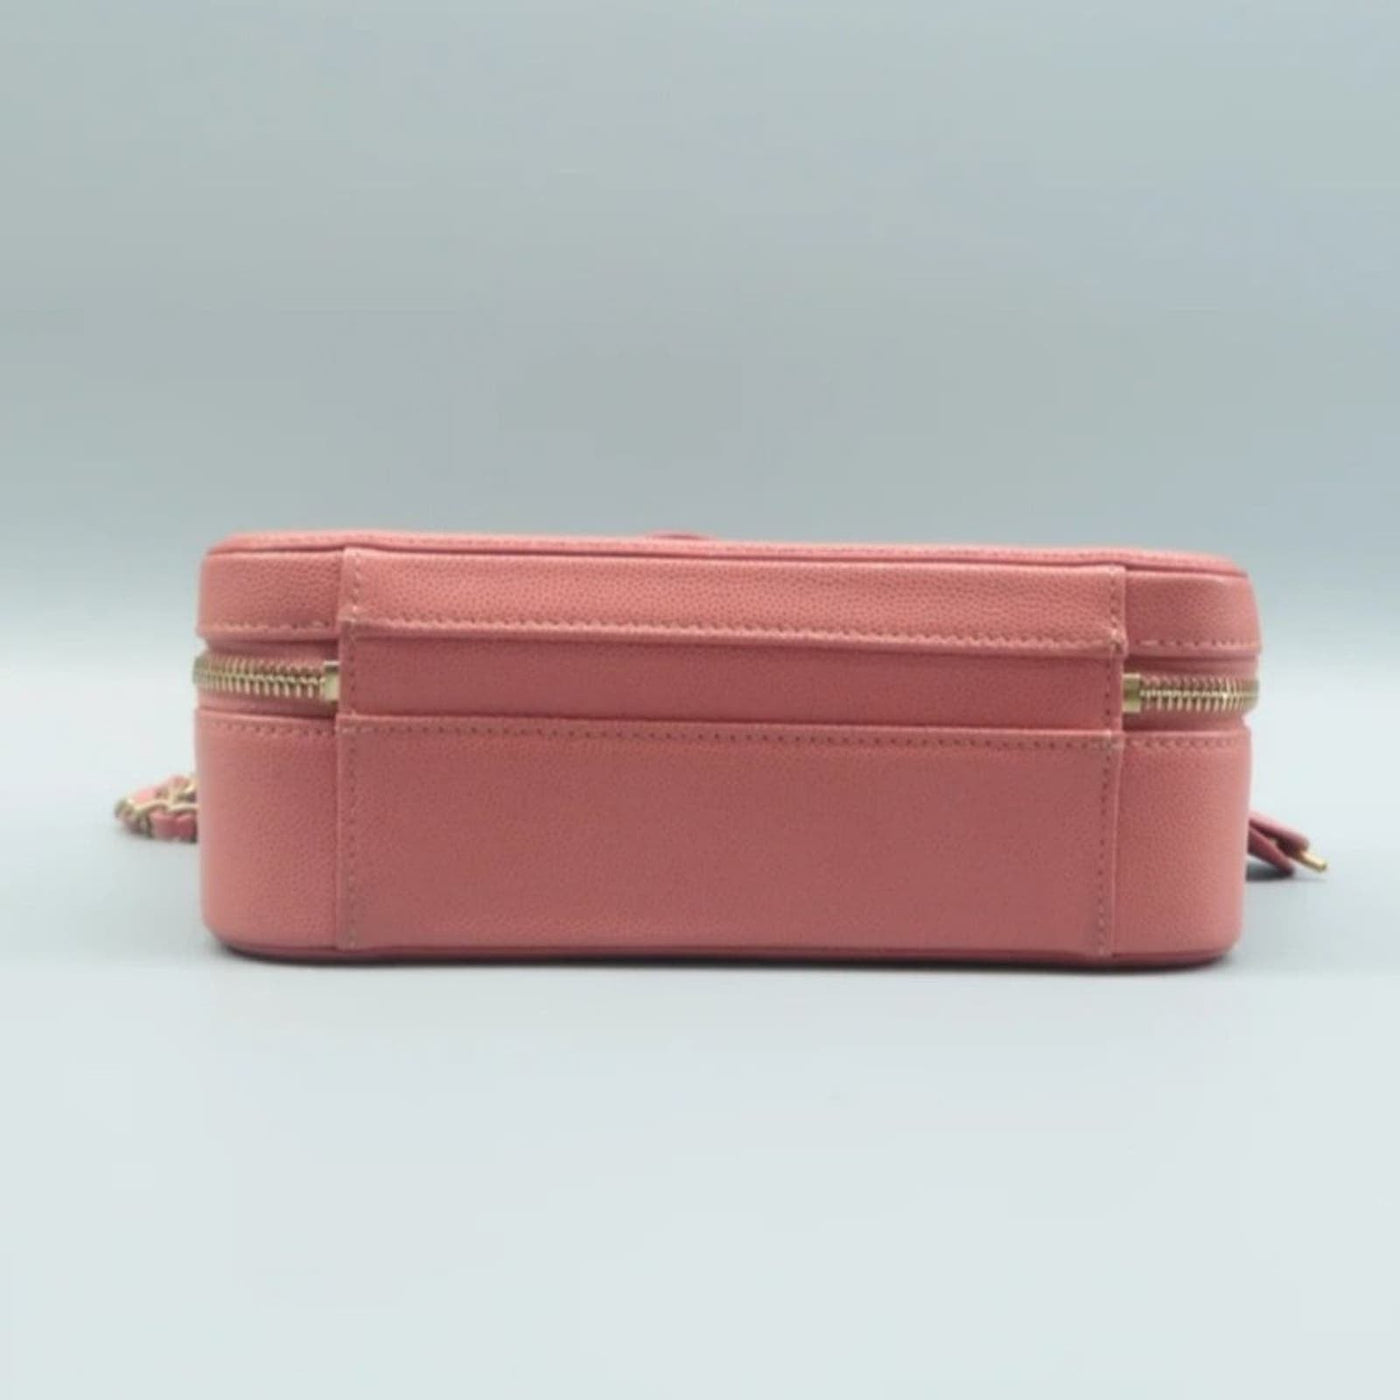 100% Authentic CHANEL Vanity Case Pink Leather Shoulder Bag - Luxury Cheaper LLC